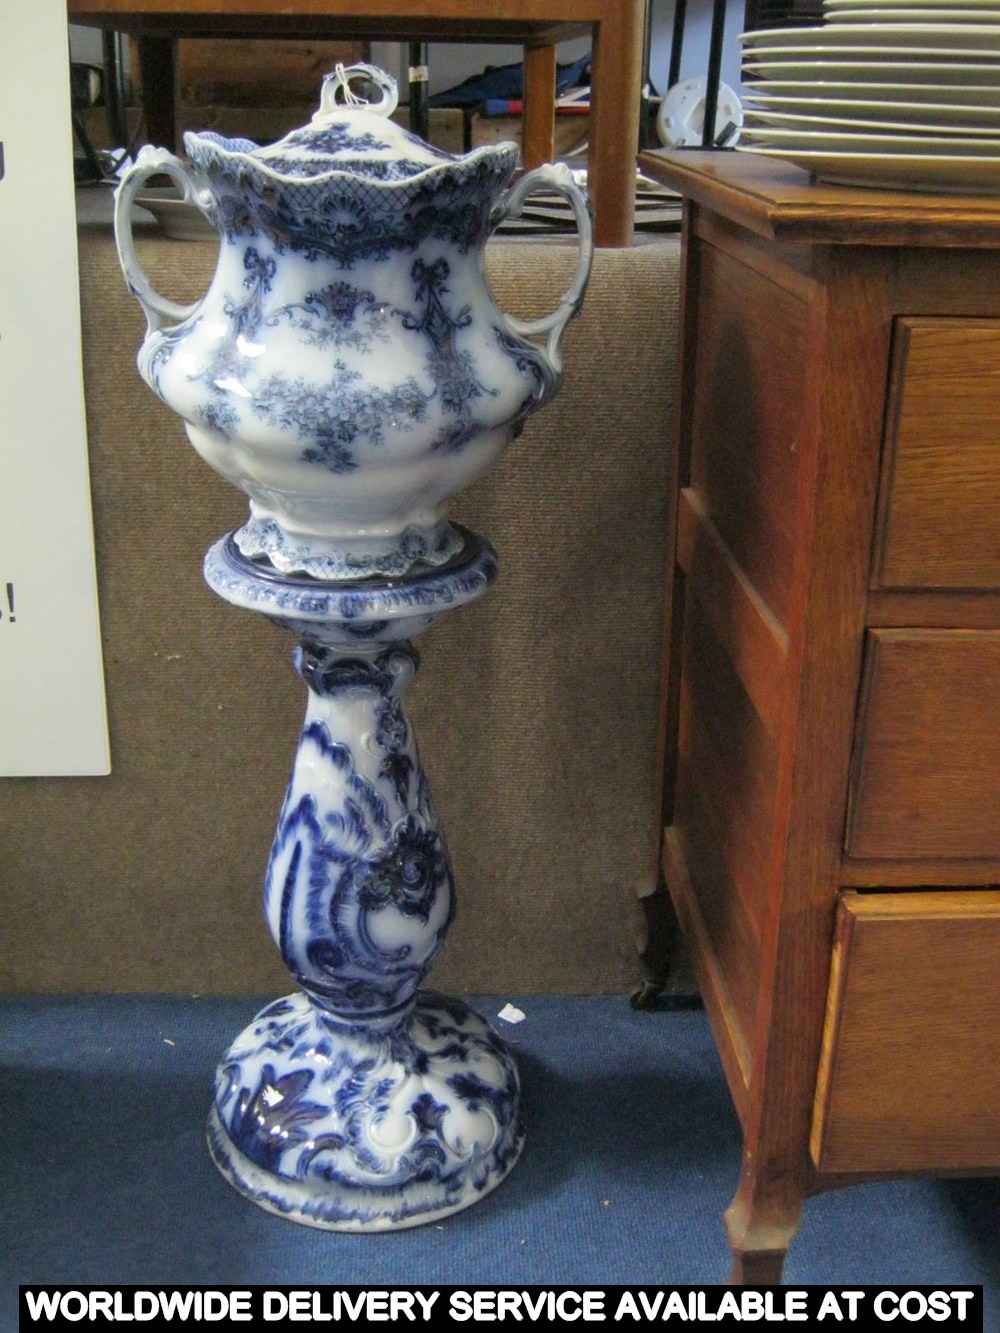 Wood & Son "Princess" blue & white two handled ceramic jardiniere on a stand